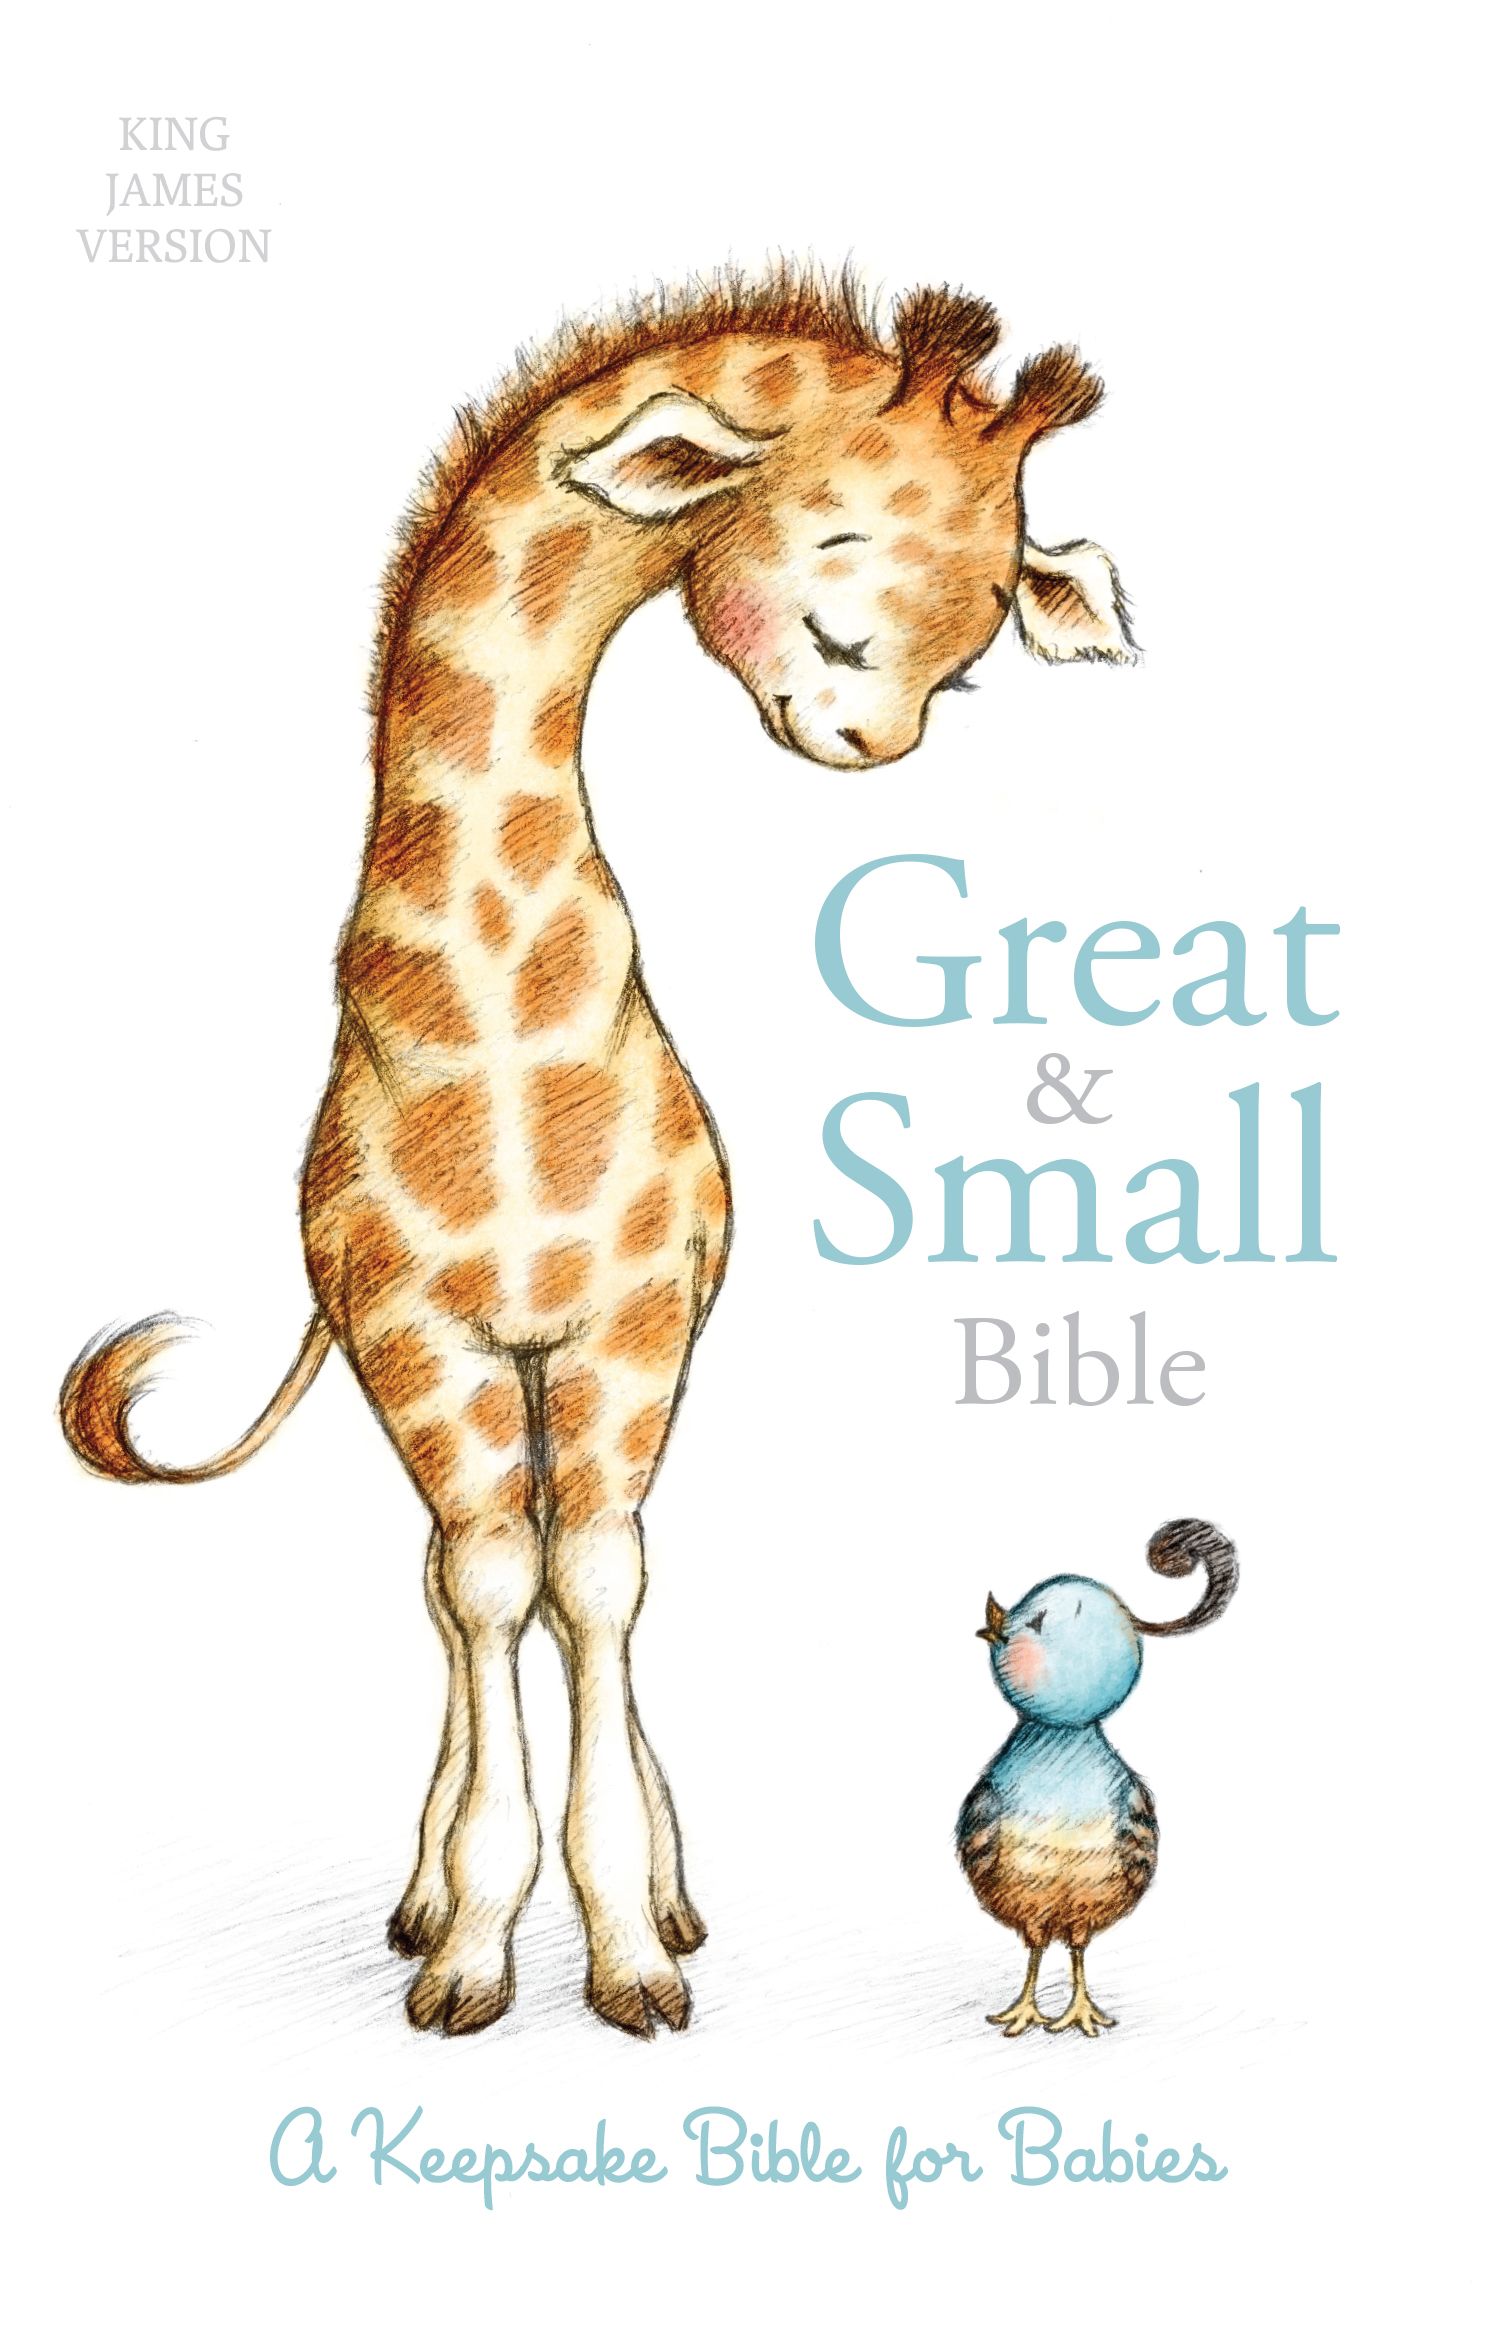 KJV Great and Small Bible, Hardcover